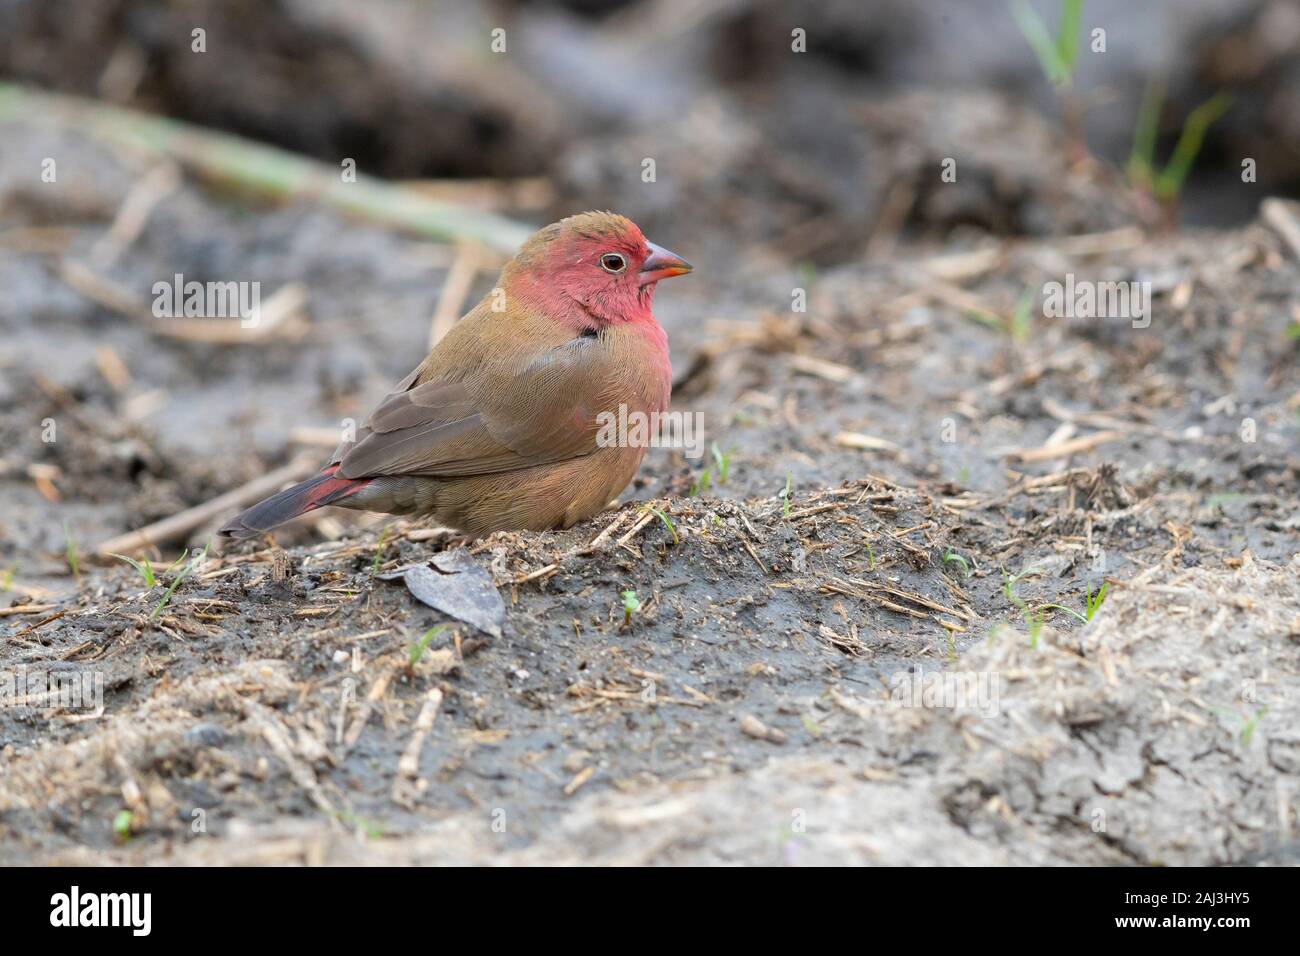 Red-billed Firefinch (Lagonosticta senegala), adult male standing on the ground, Mpumalanga, South Africa Stock Photo